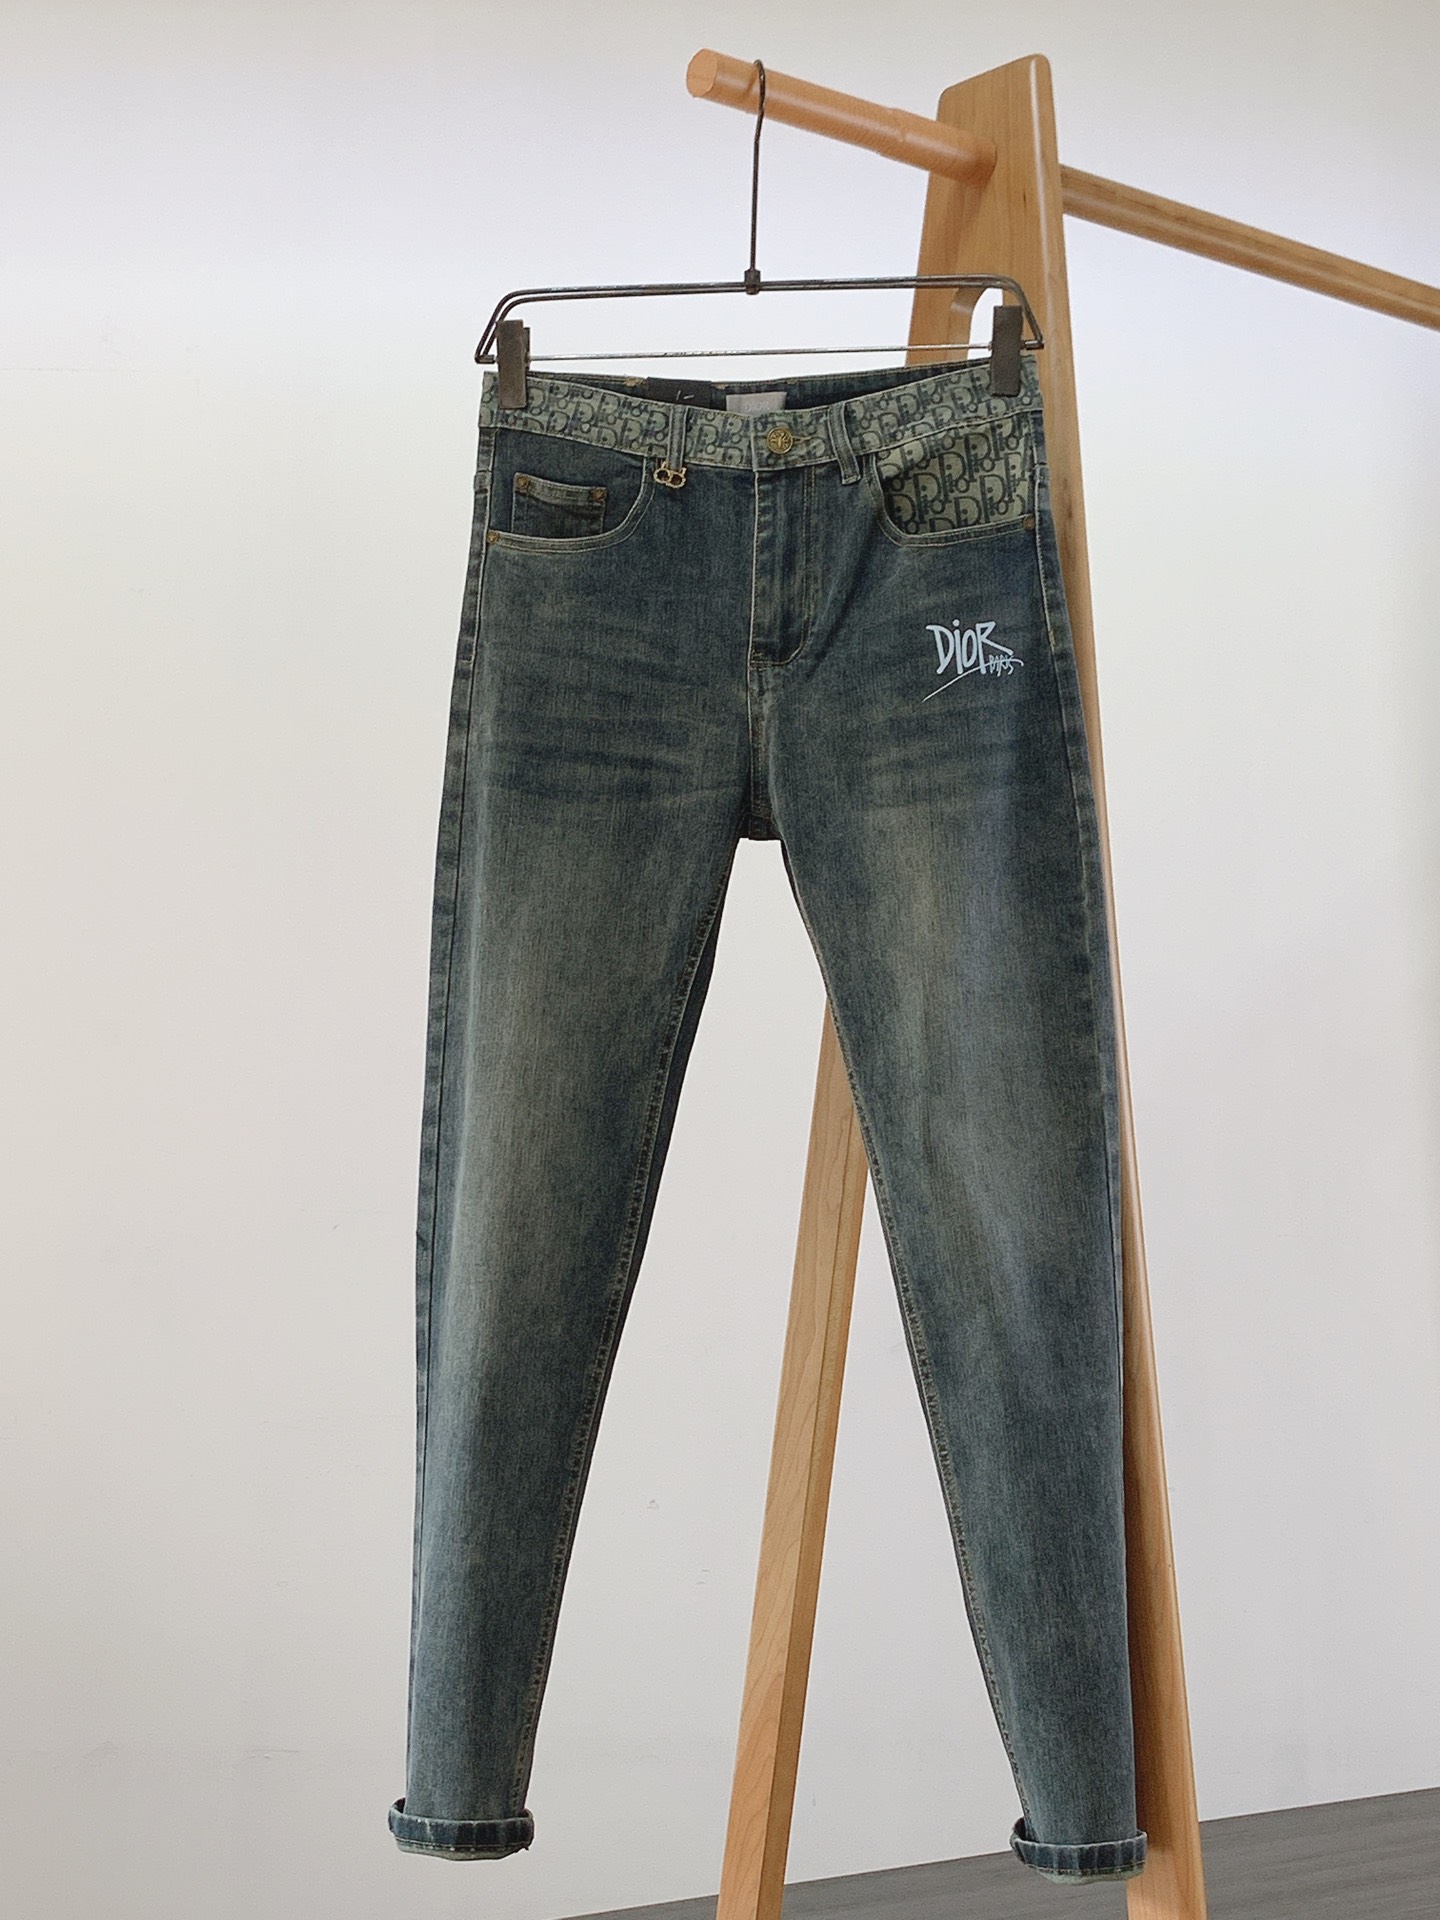 Dior Clothing Jeans Spring/Summer Collection Fashion Casual